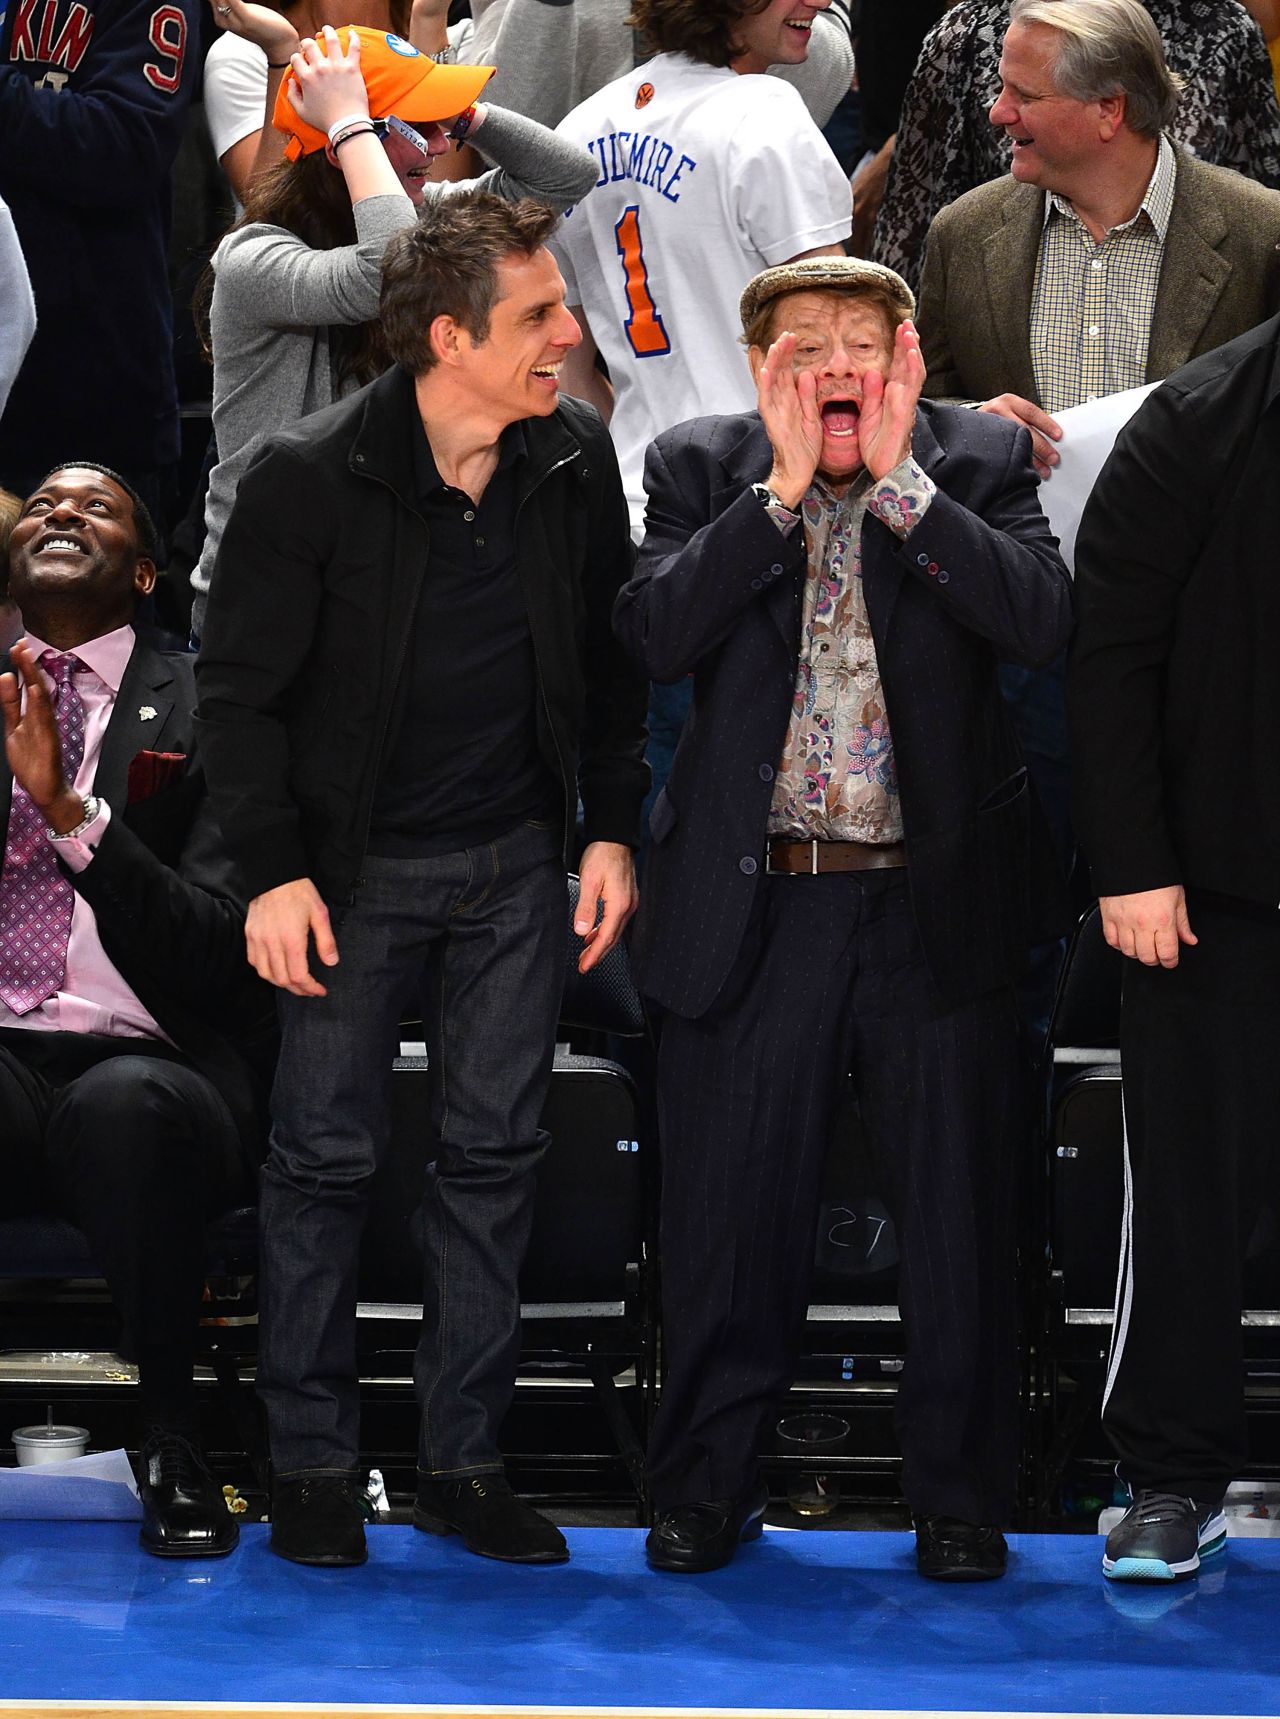 Stiller and his son attend a New York Knicks basketball game in 2012.